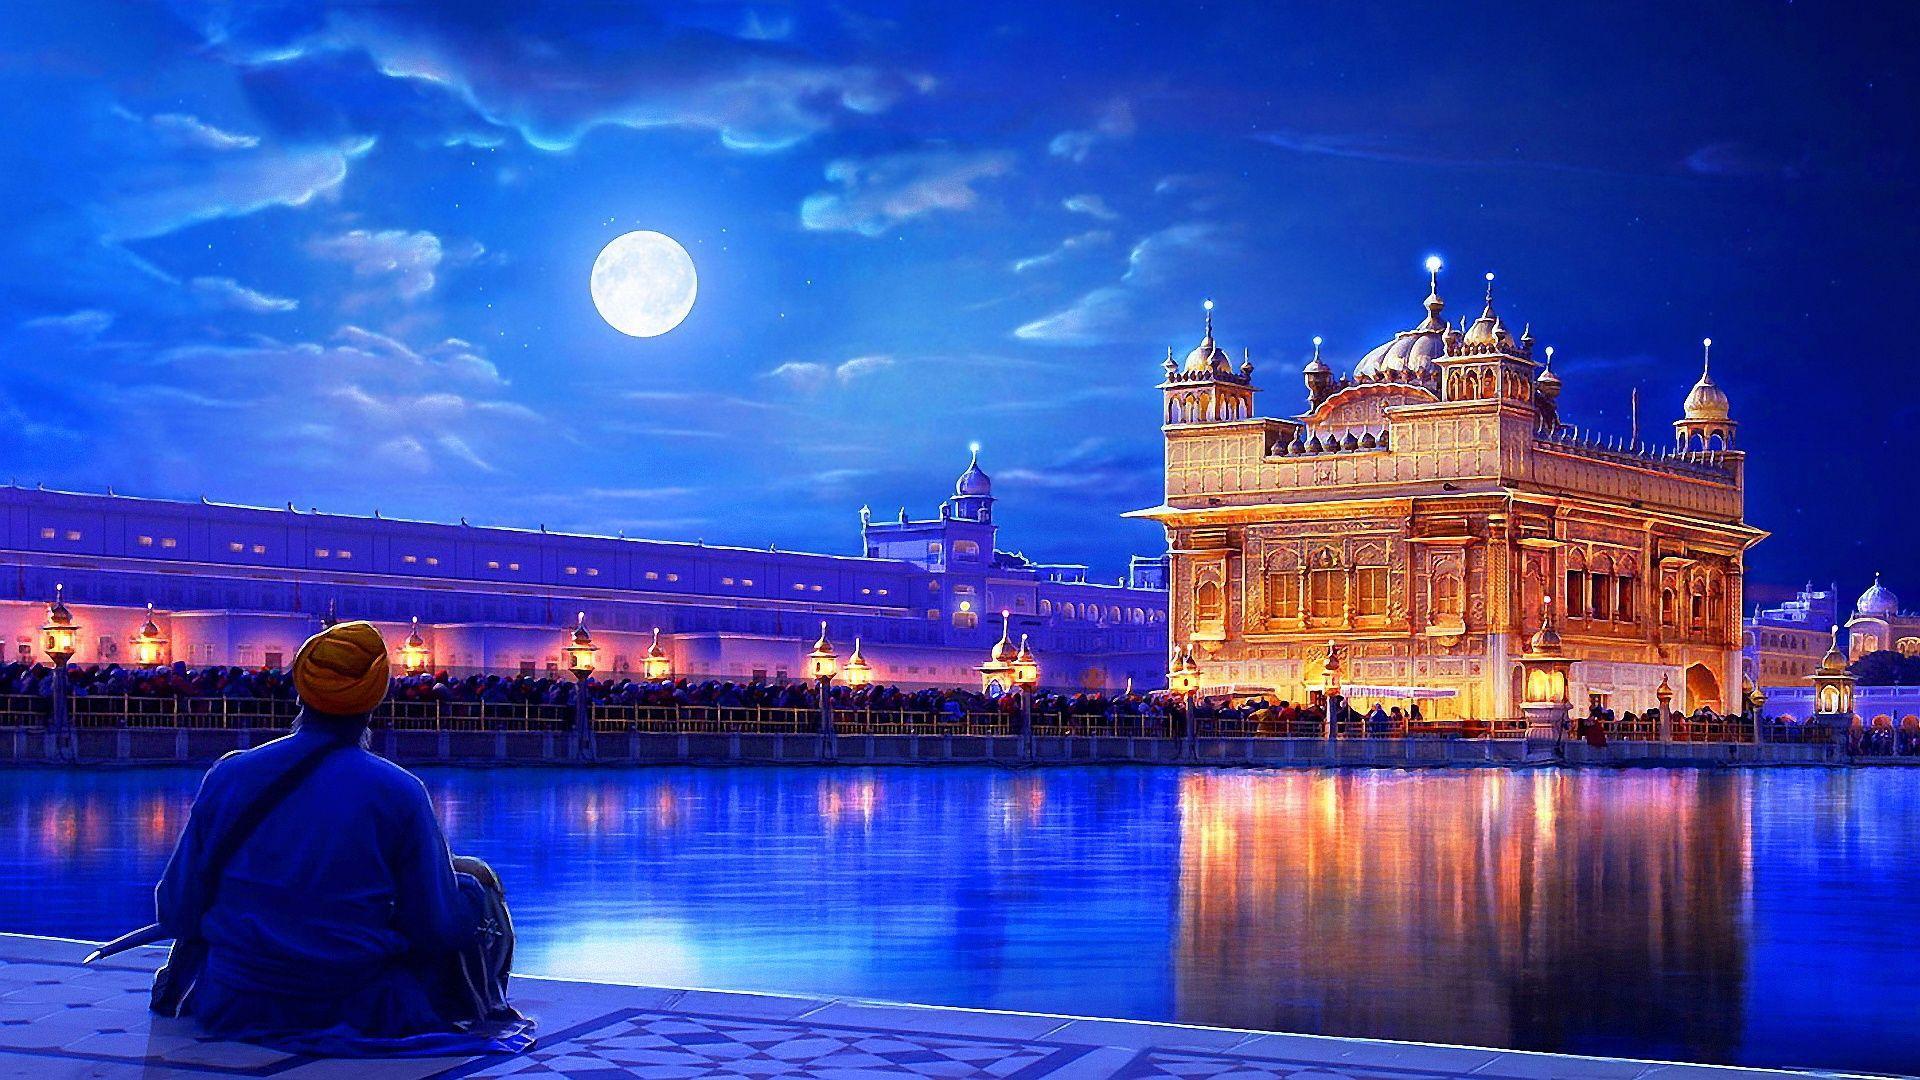 GOLDEN TEMPLE INDIA India Wallpaper HD Free Wallpaper Background